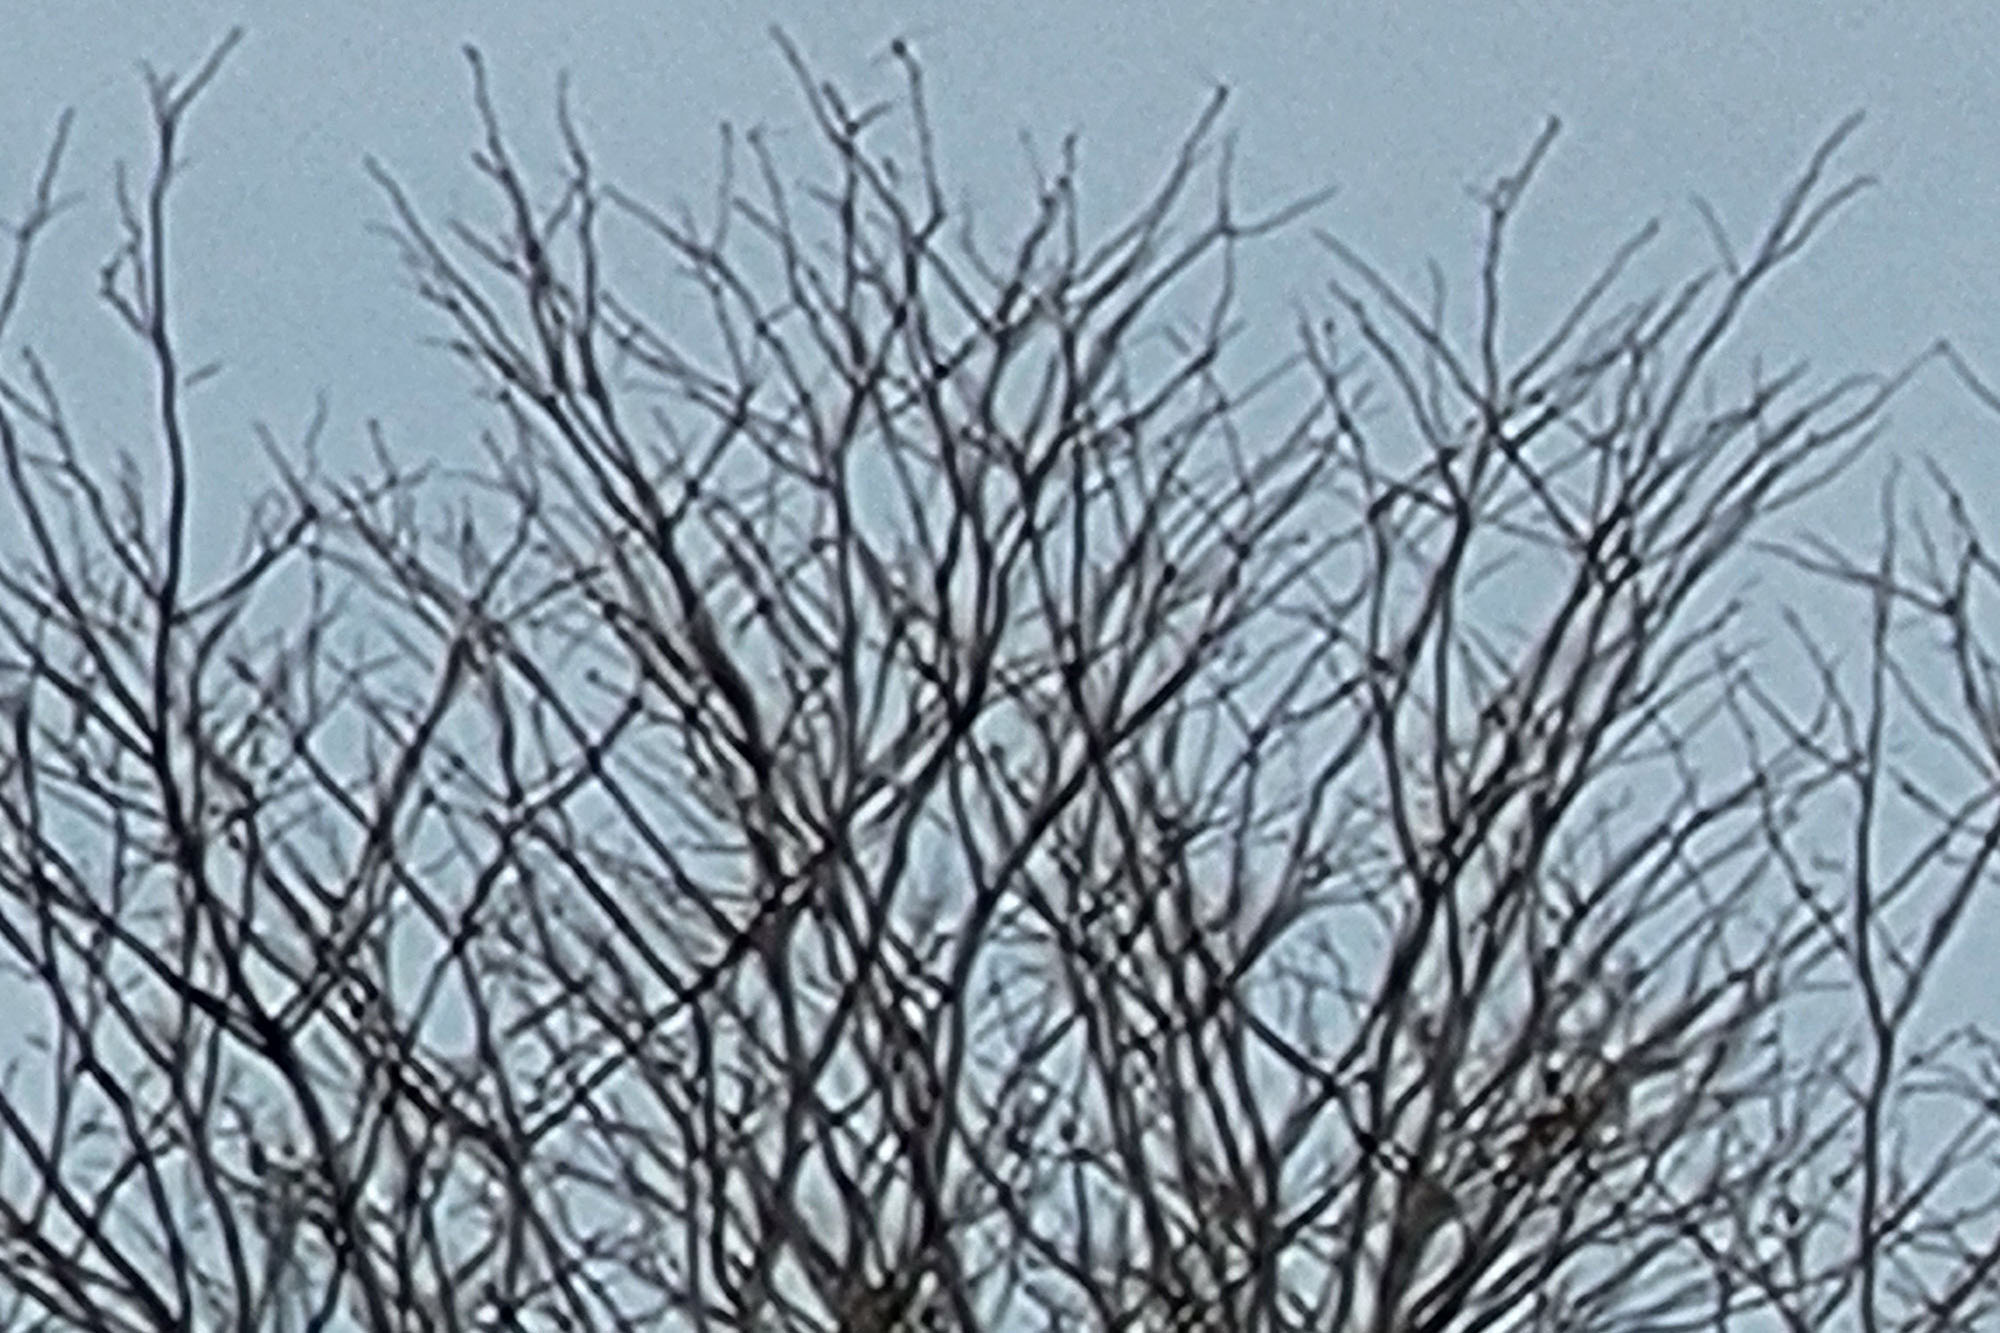 This is a sample photo of a tree at 30X zoom from the Samsung Galaxy S21 FE 5G.